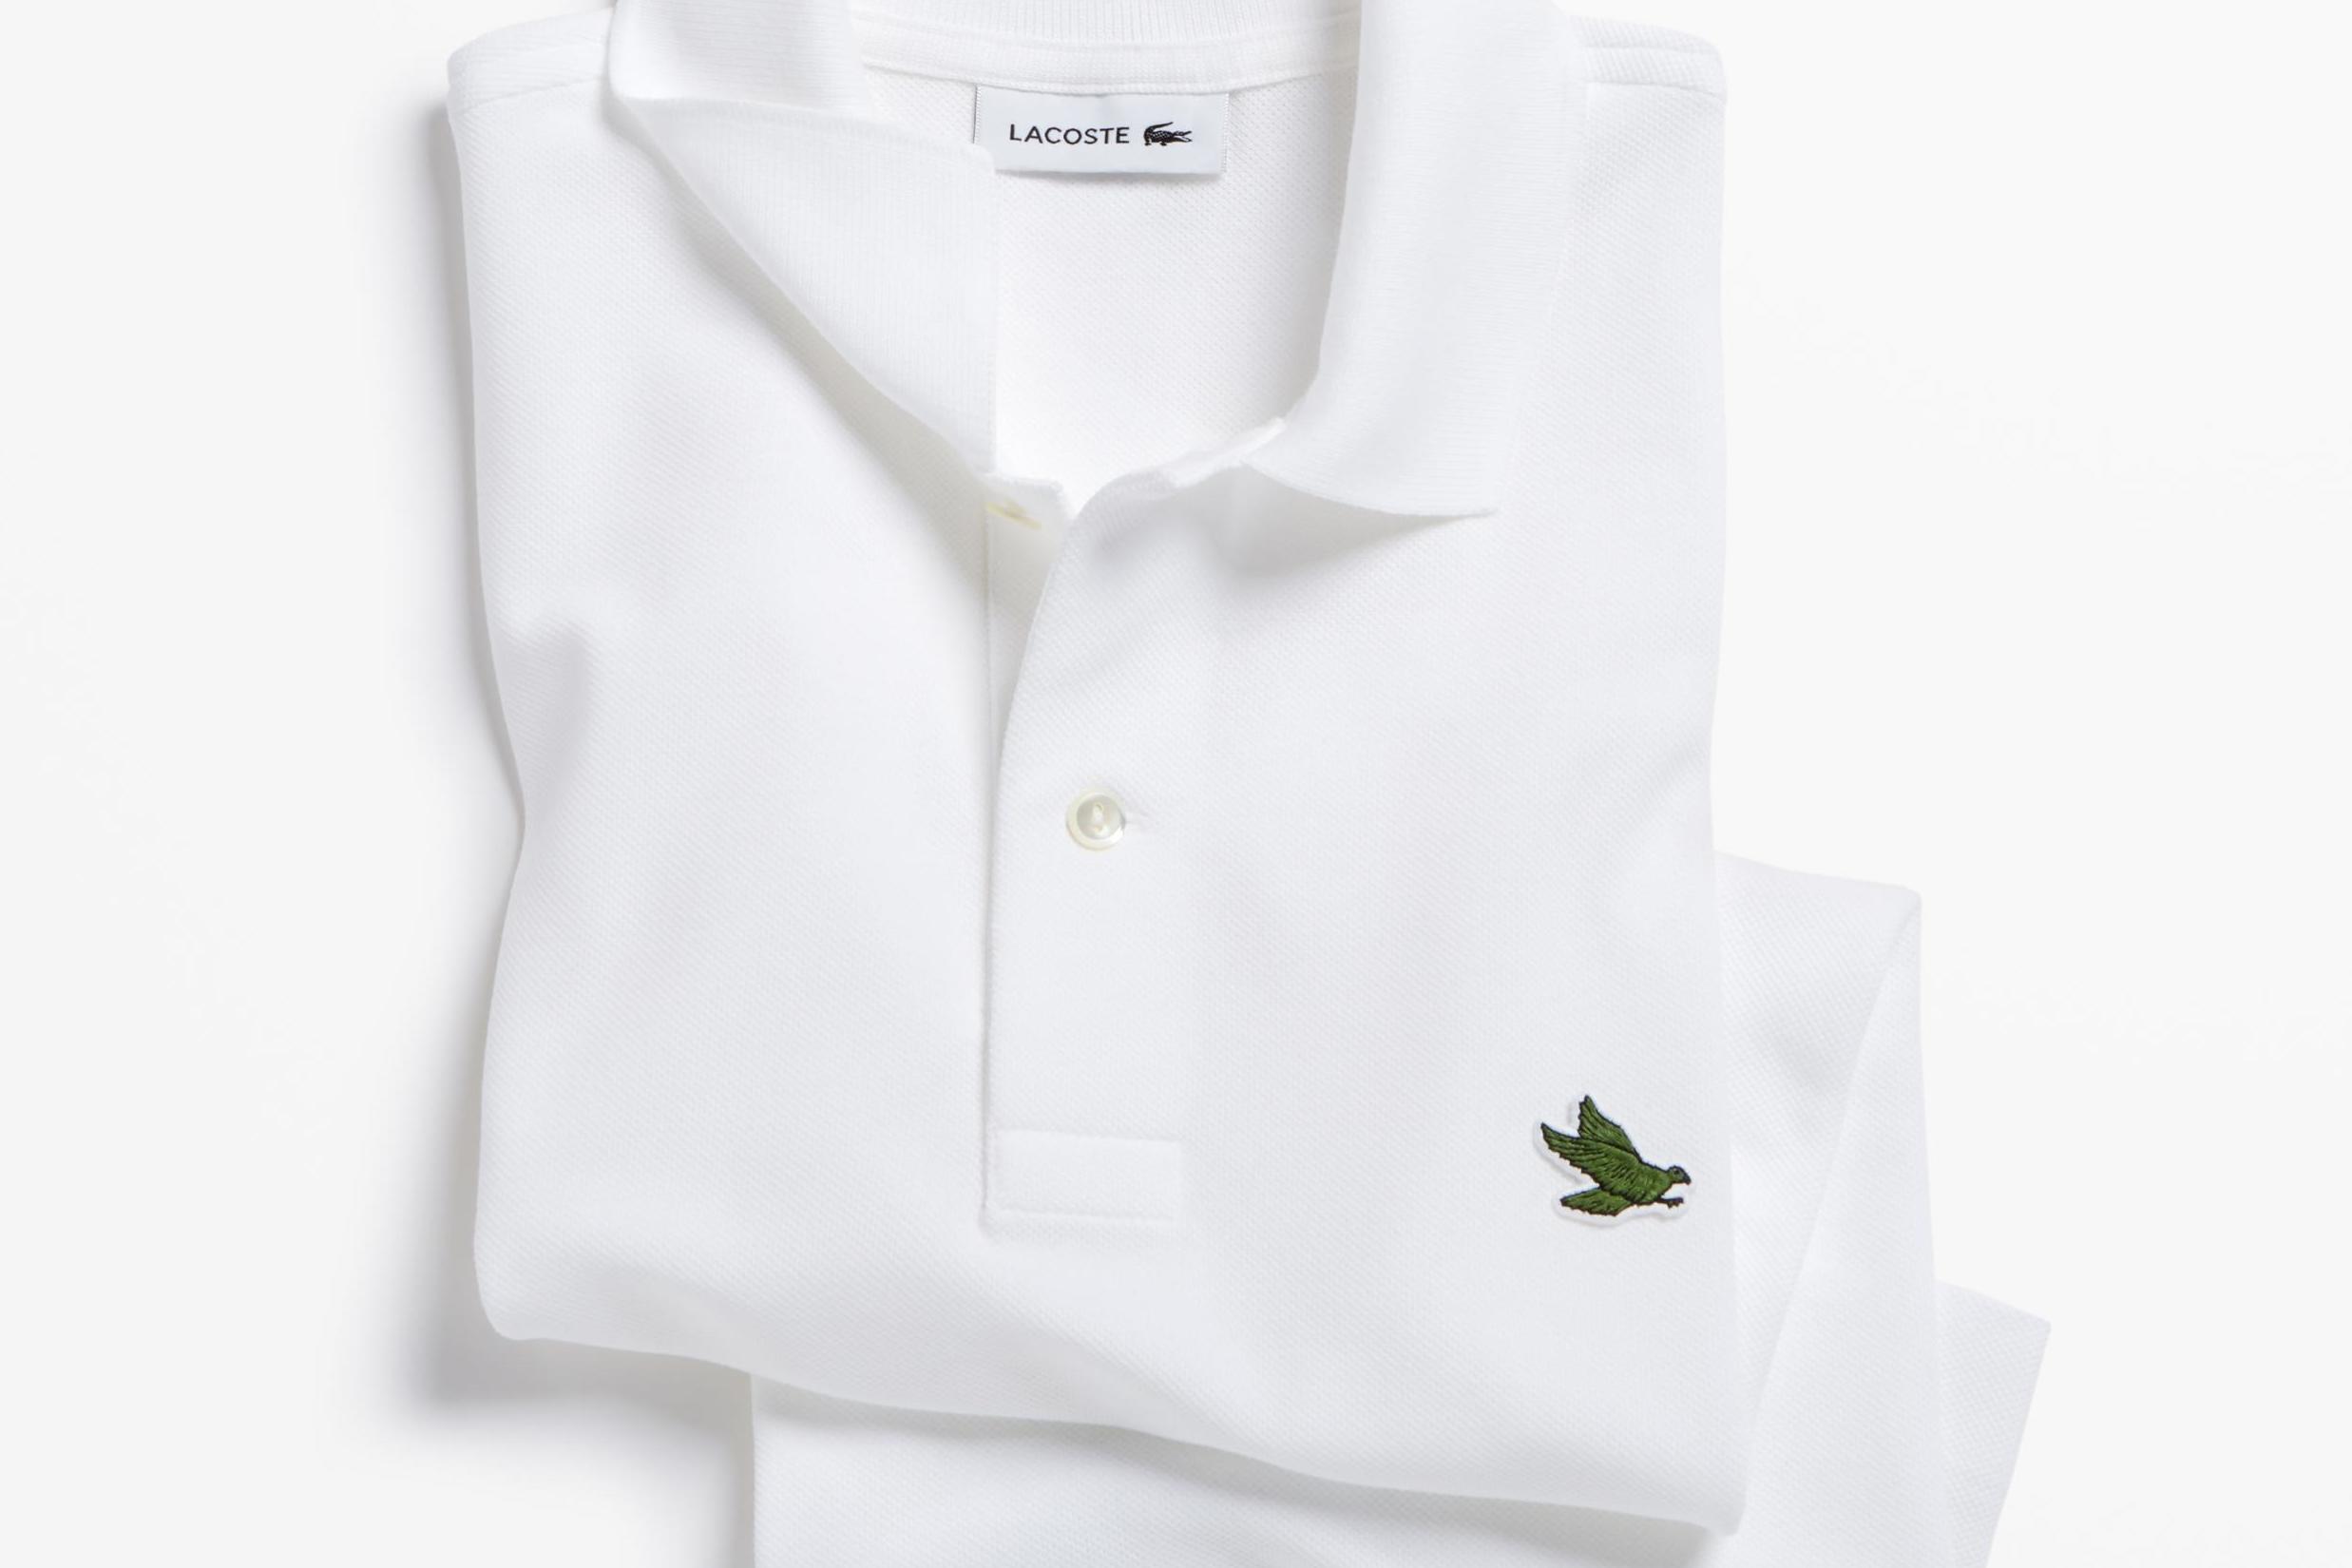 Alligator Polo Shirts with Logo - Lacoste replaces iconic crocodile logo with endangered species as